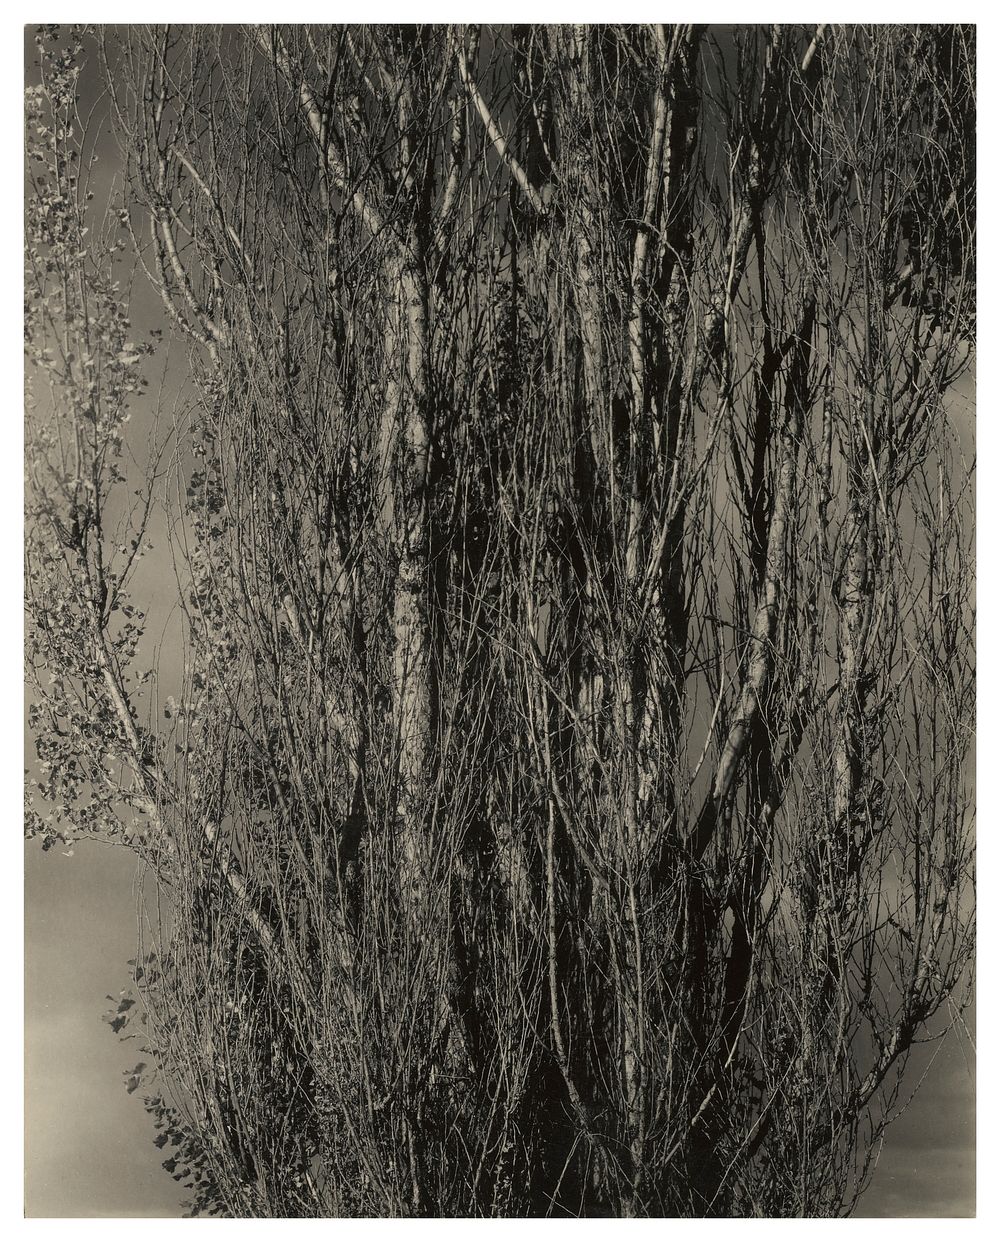 Dying Poplar and Live Branch - Lake George (1932) photo in high resolution by Alfred Stieglitz.